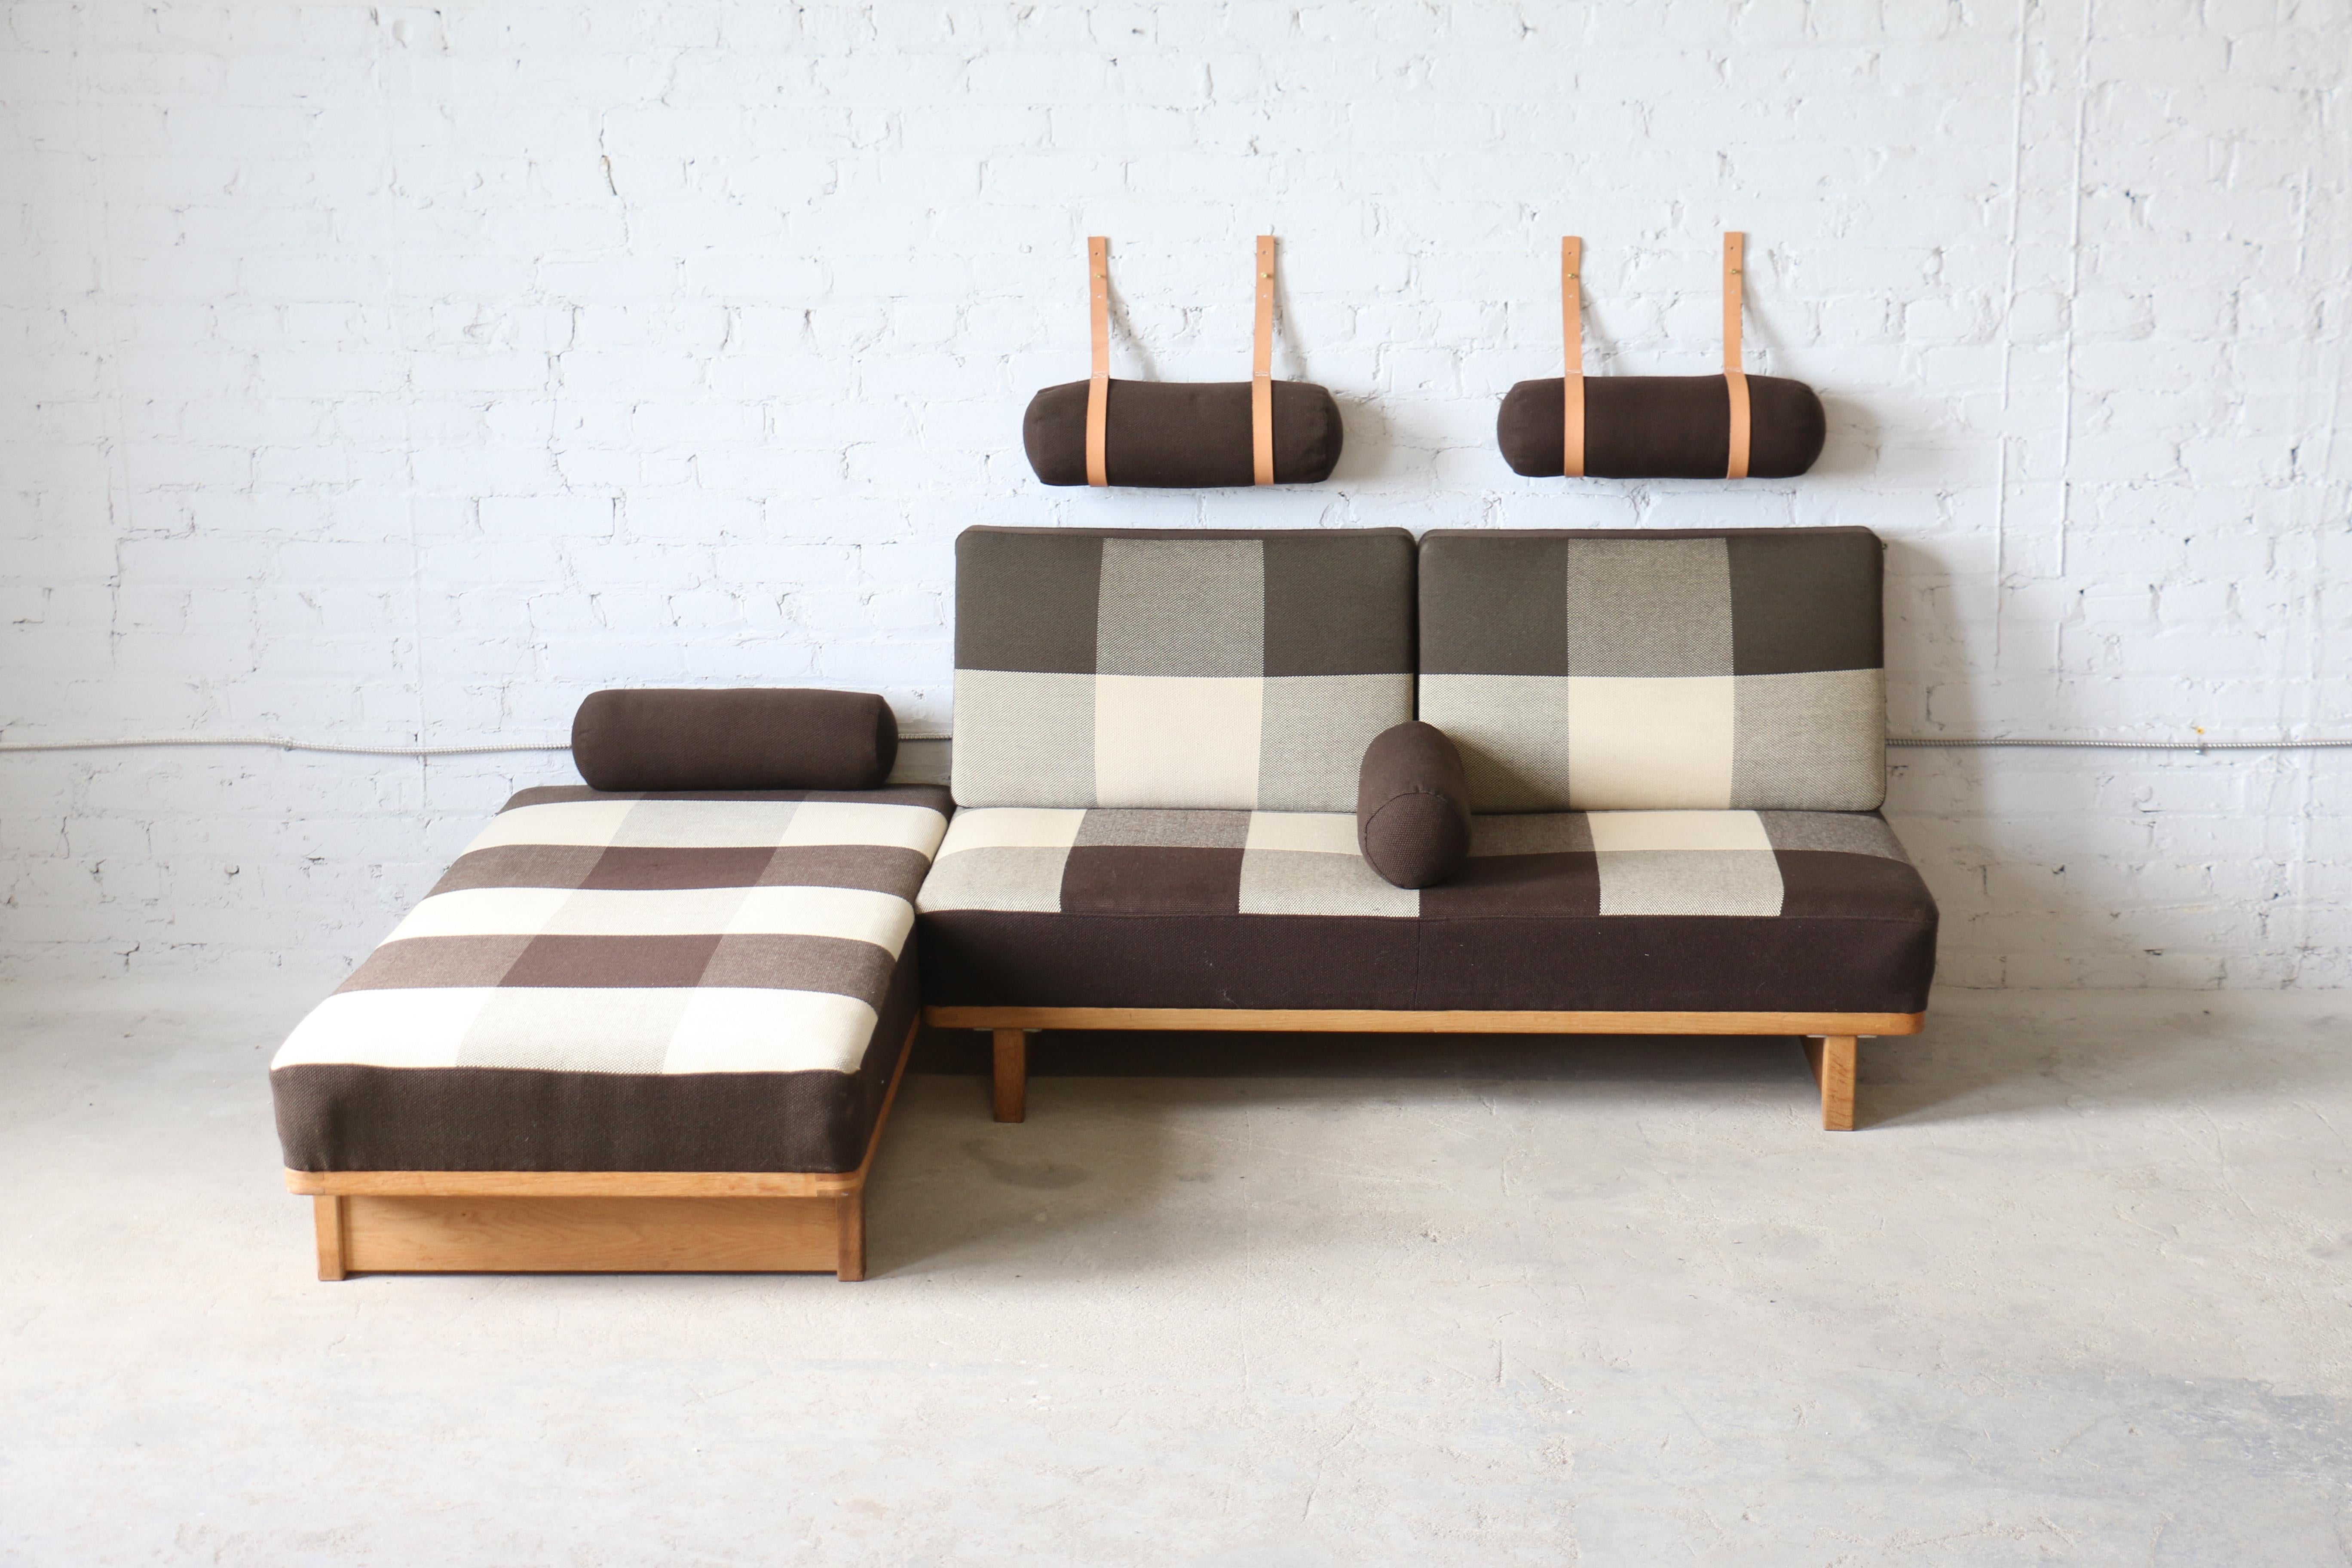 A rare pair of sofas/daybeds designed by Børge Mogensen for Fredericia A/S. Originally designed in a larger version for Erhard Rasmussen, this awesome sofa set is truly unique. It is nicknamed the 